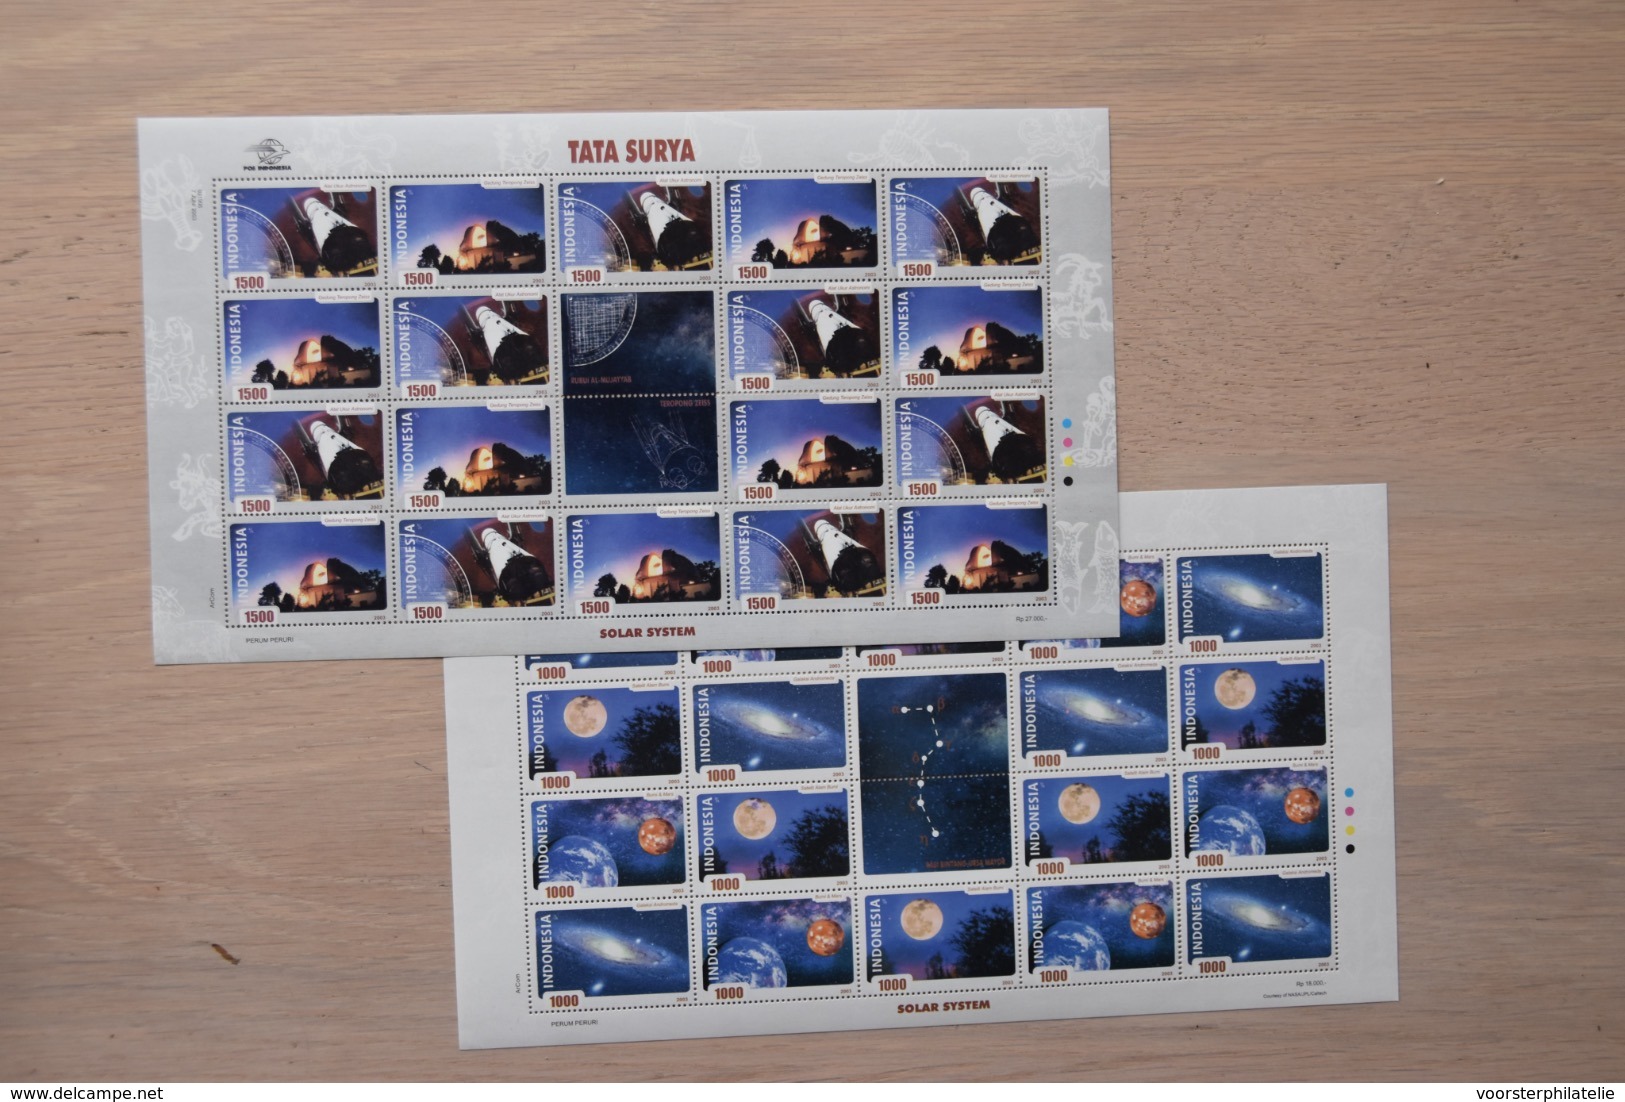 INDONESIA INDONESIE MNH ** 2003 GALAXY MILKY WAY PLANETS - Indonesia